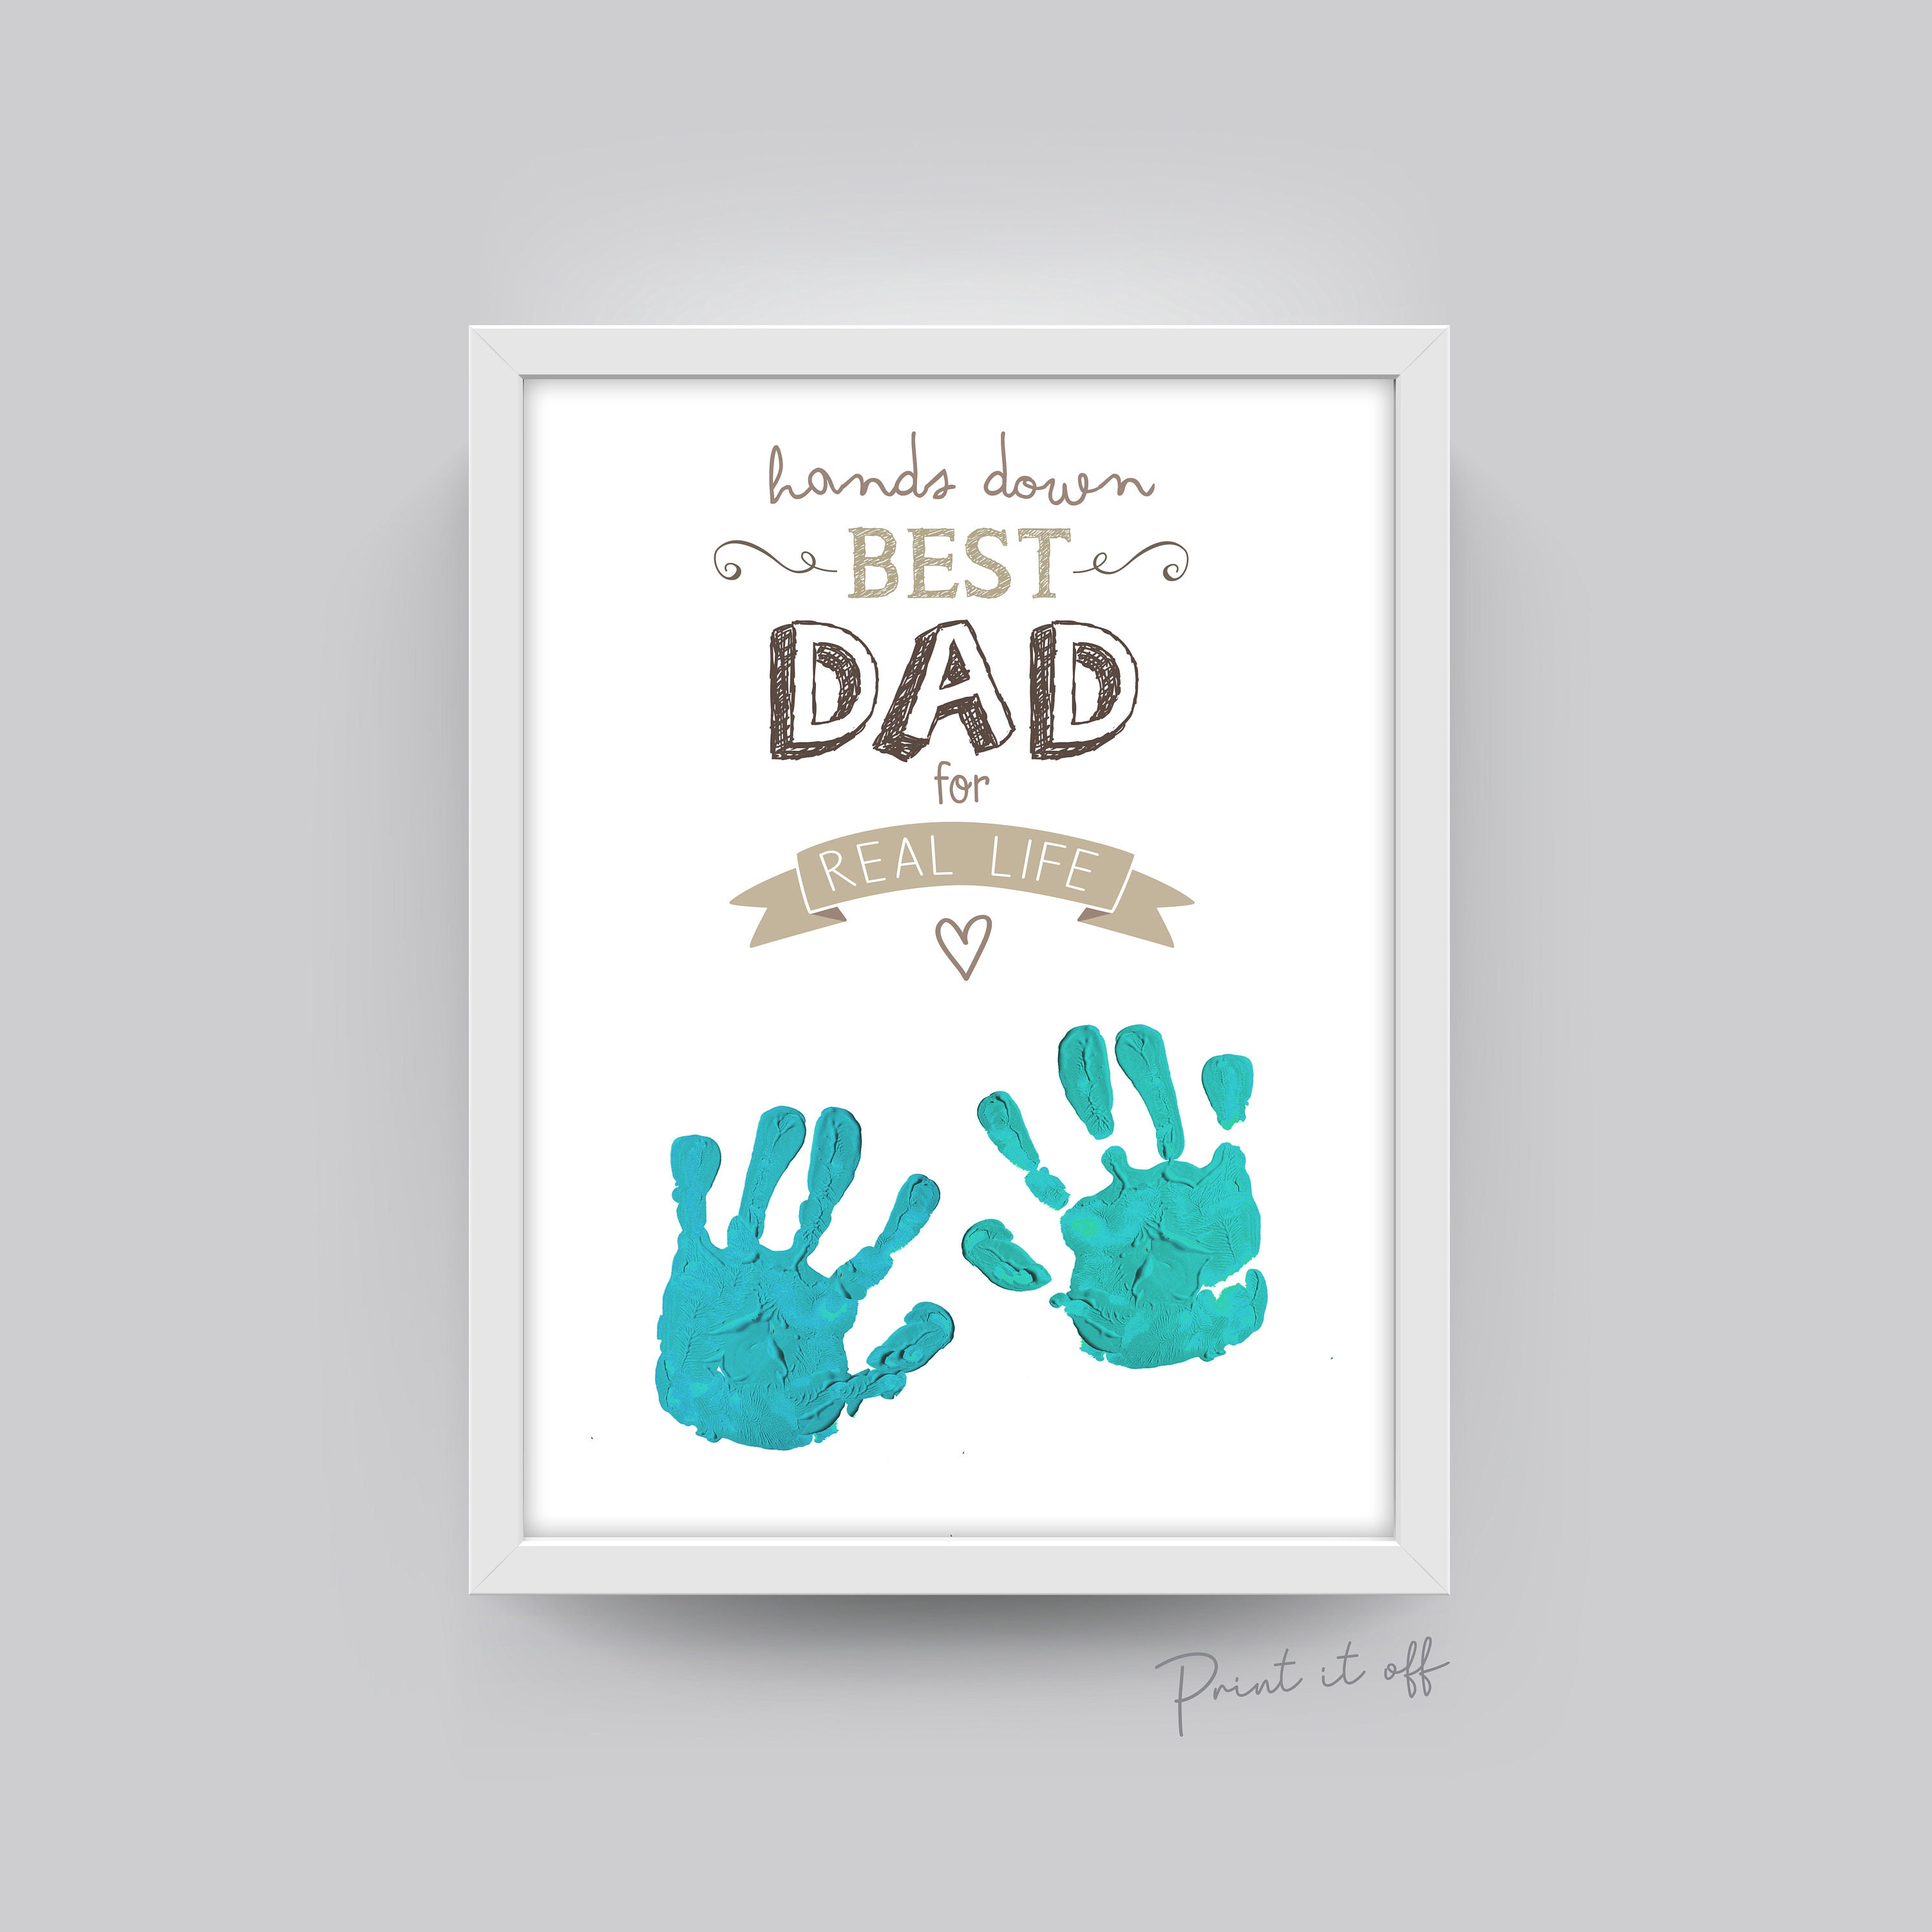 Handprint Art Craft / Fathers Day Dad / Kids Baby Craft Keepsake / Hands  Down Best Dad for Real Life / Bluey / Printable Print Card 0020 